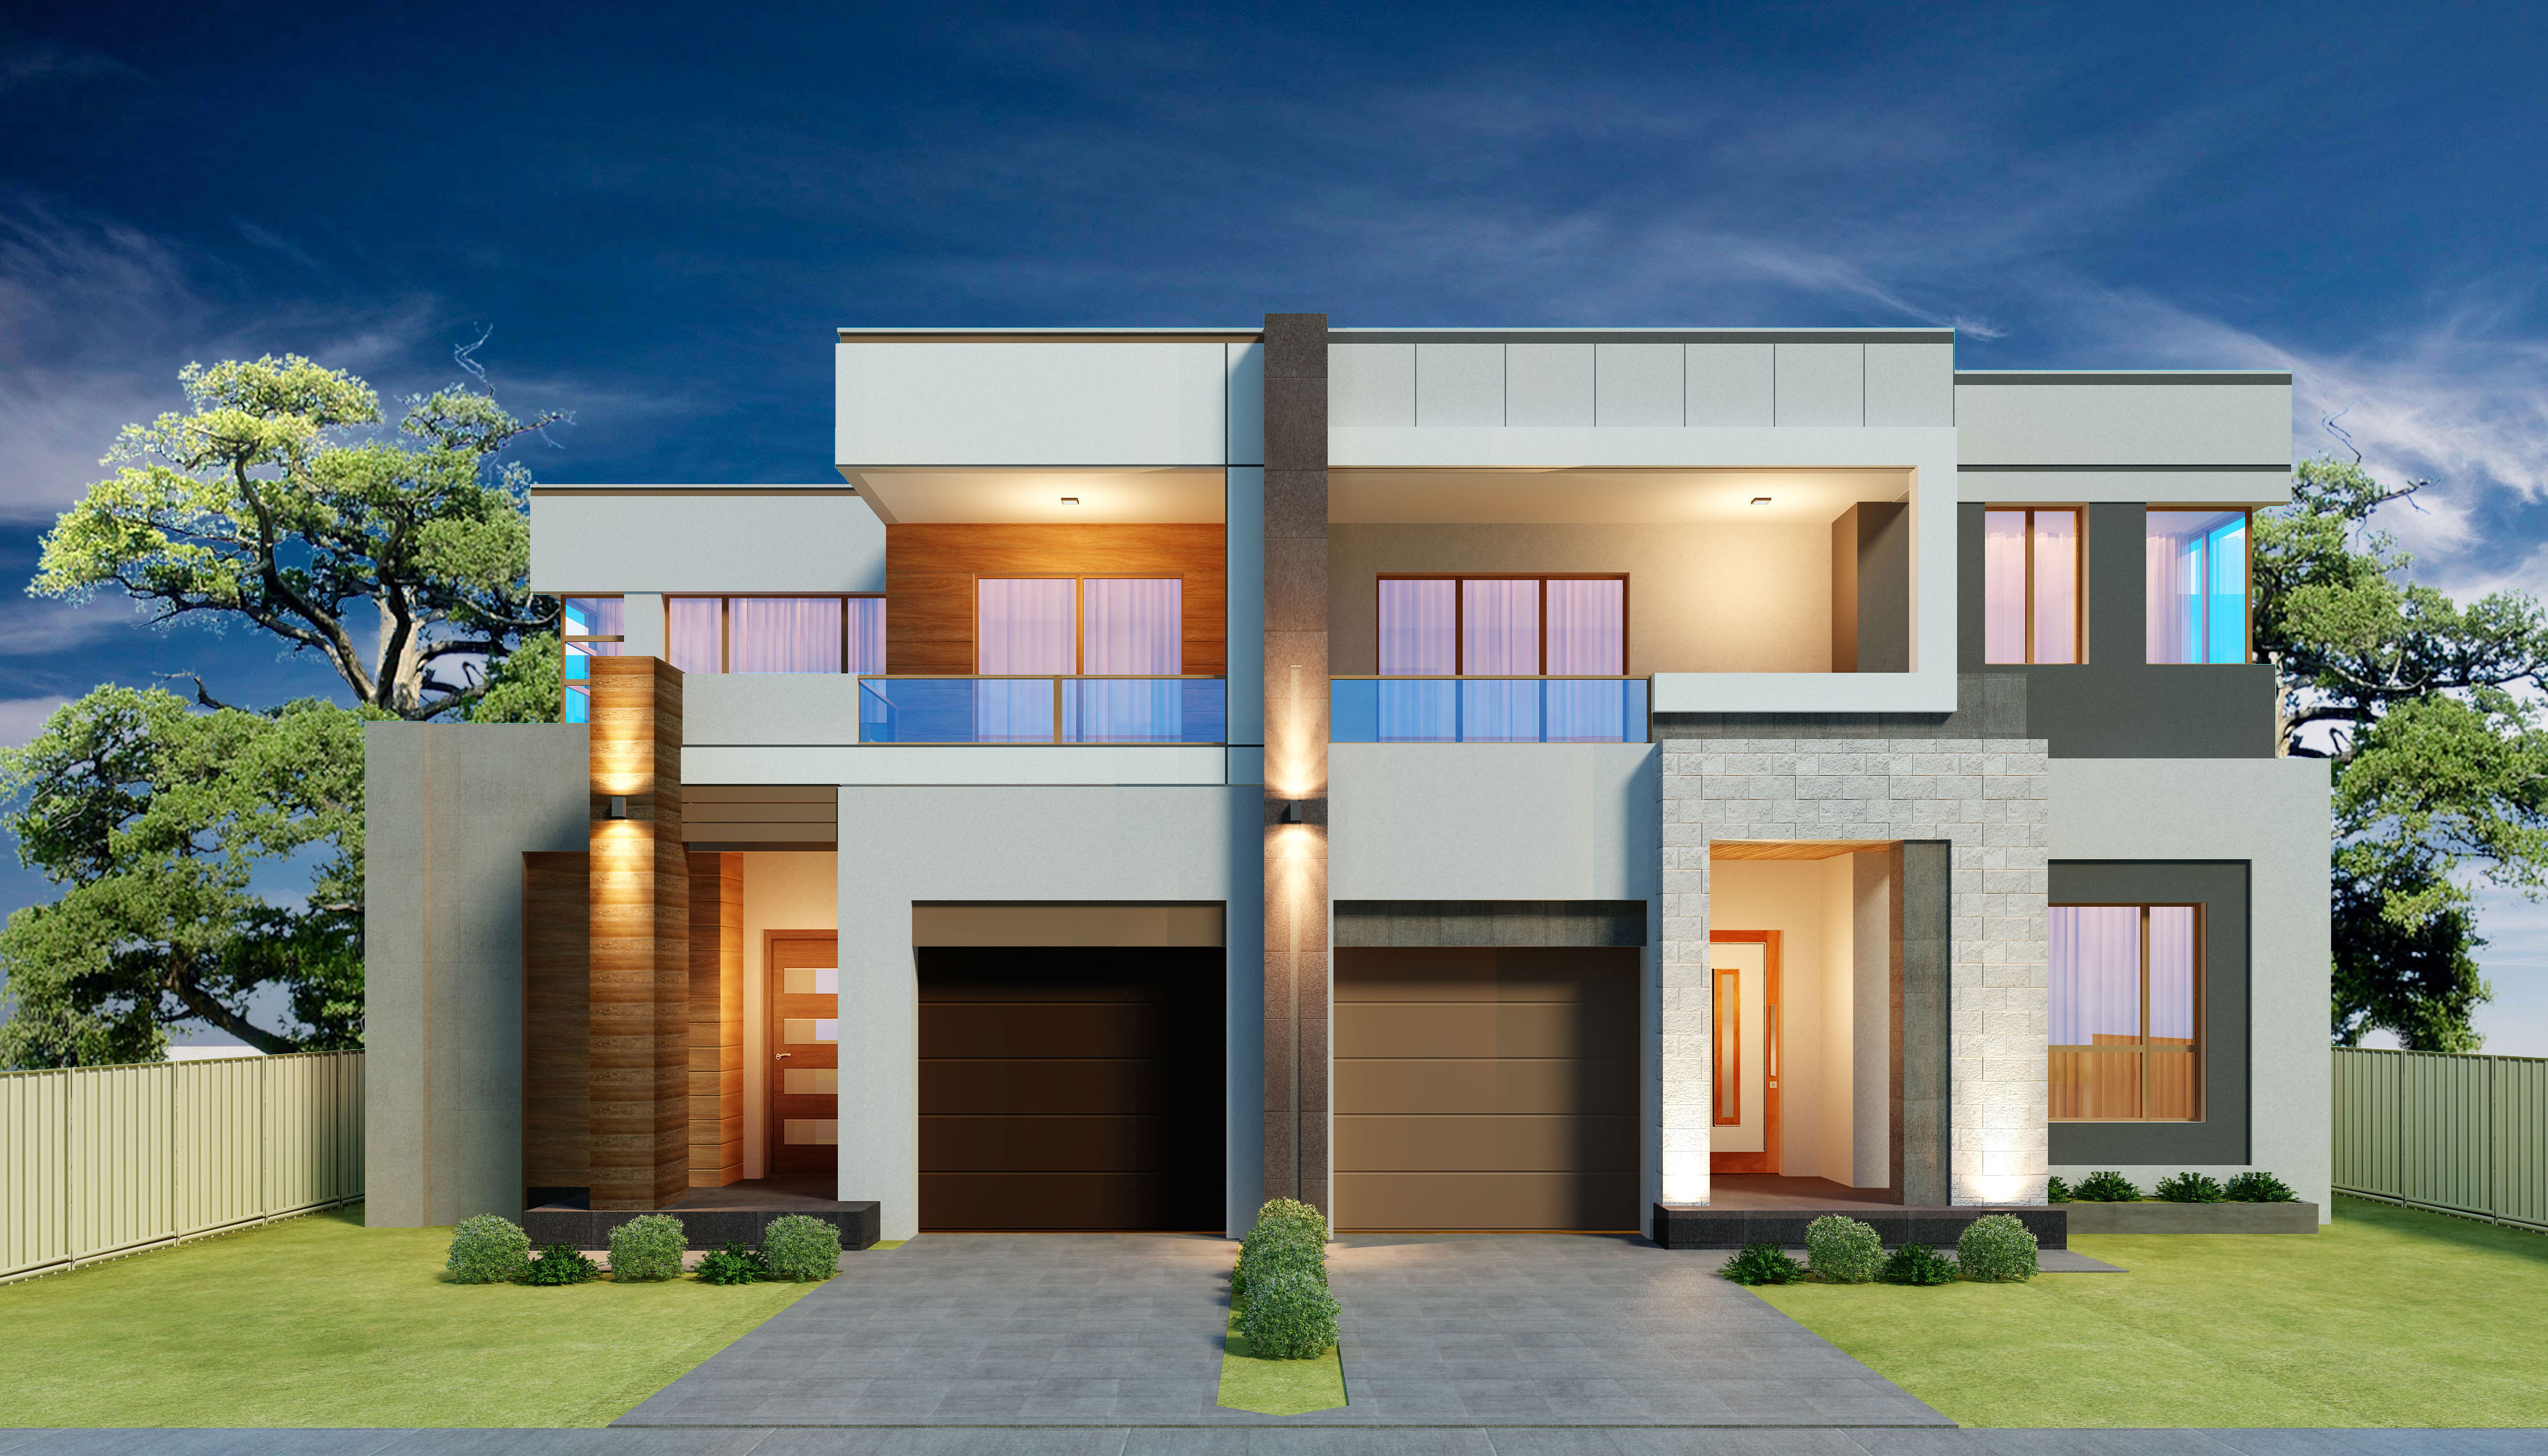 Tips For Duplex House Plans And Duplex House Design In India Floor Plan Design In India